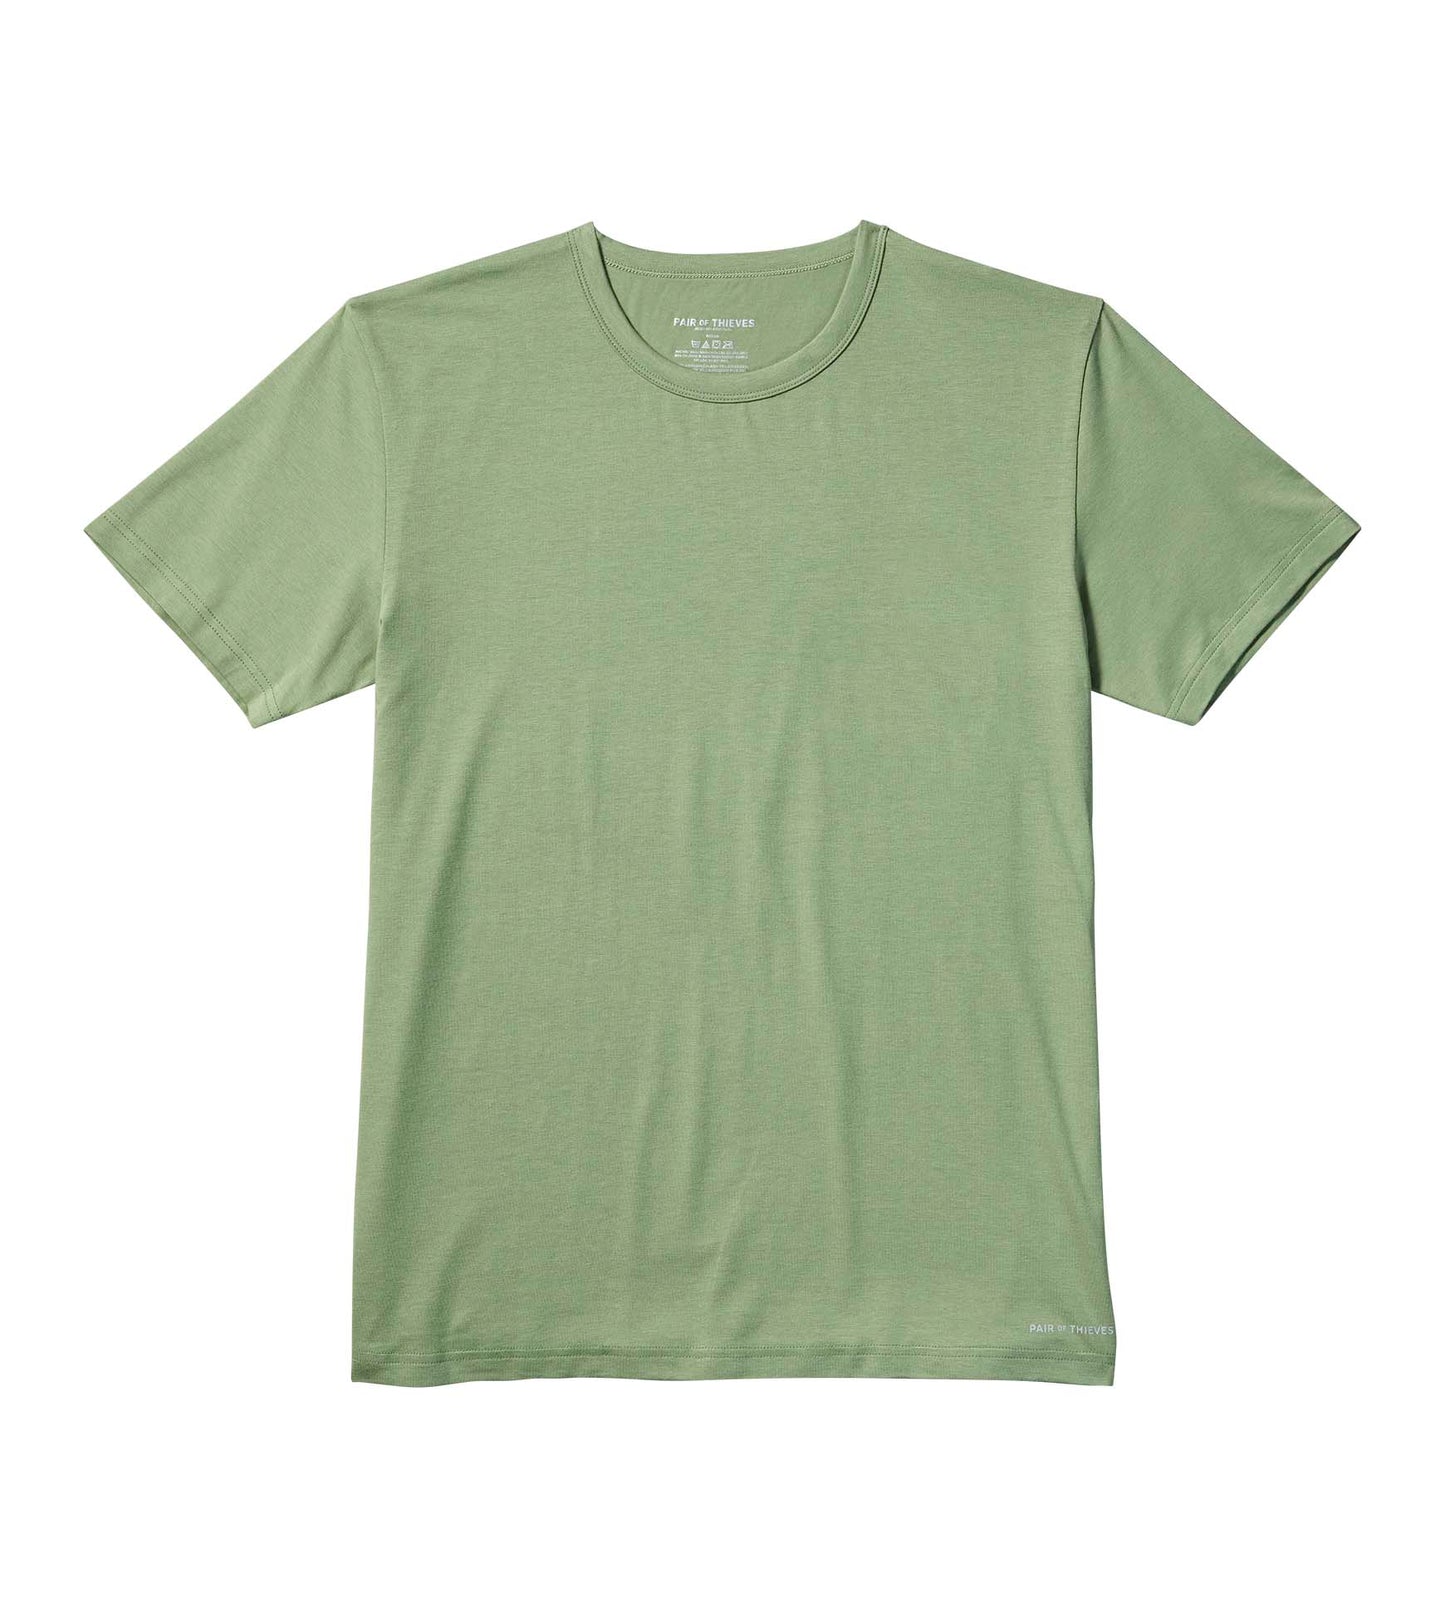 SuperSoft Crew Neck Tee - SAGE - Pair of Thieves